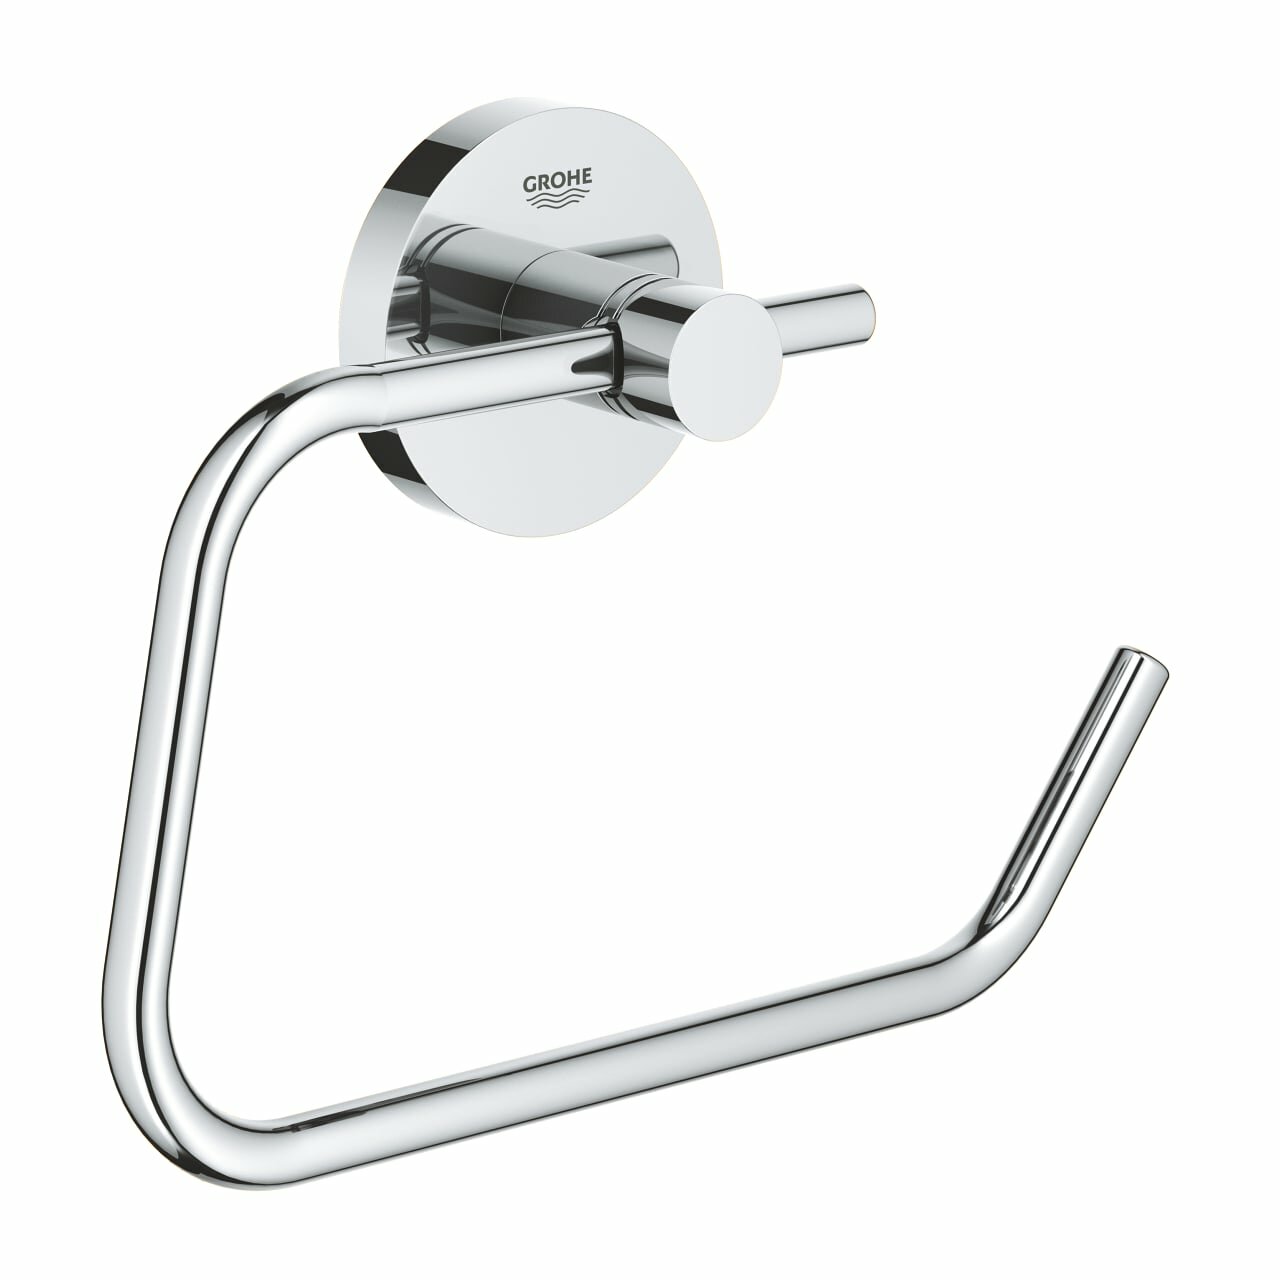   Grohe Concetto 40689 001 (40689001)